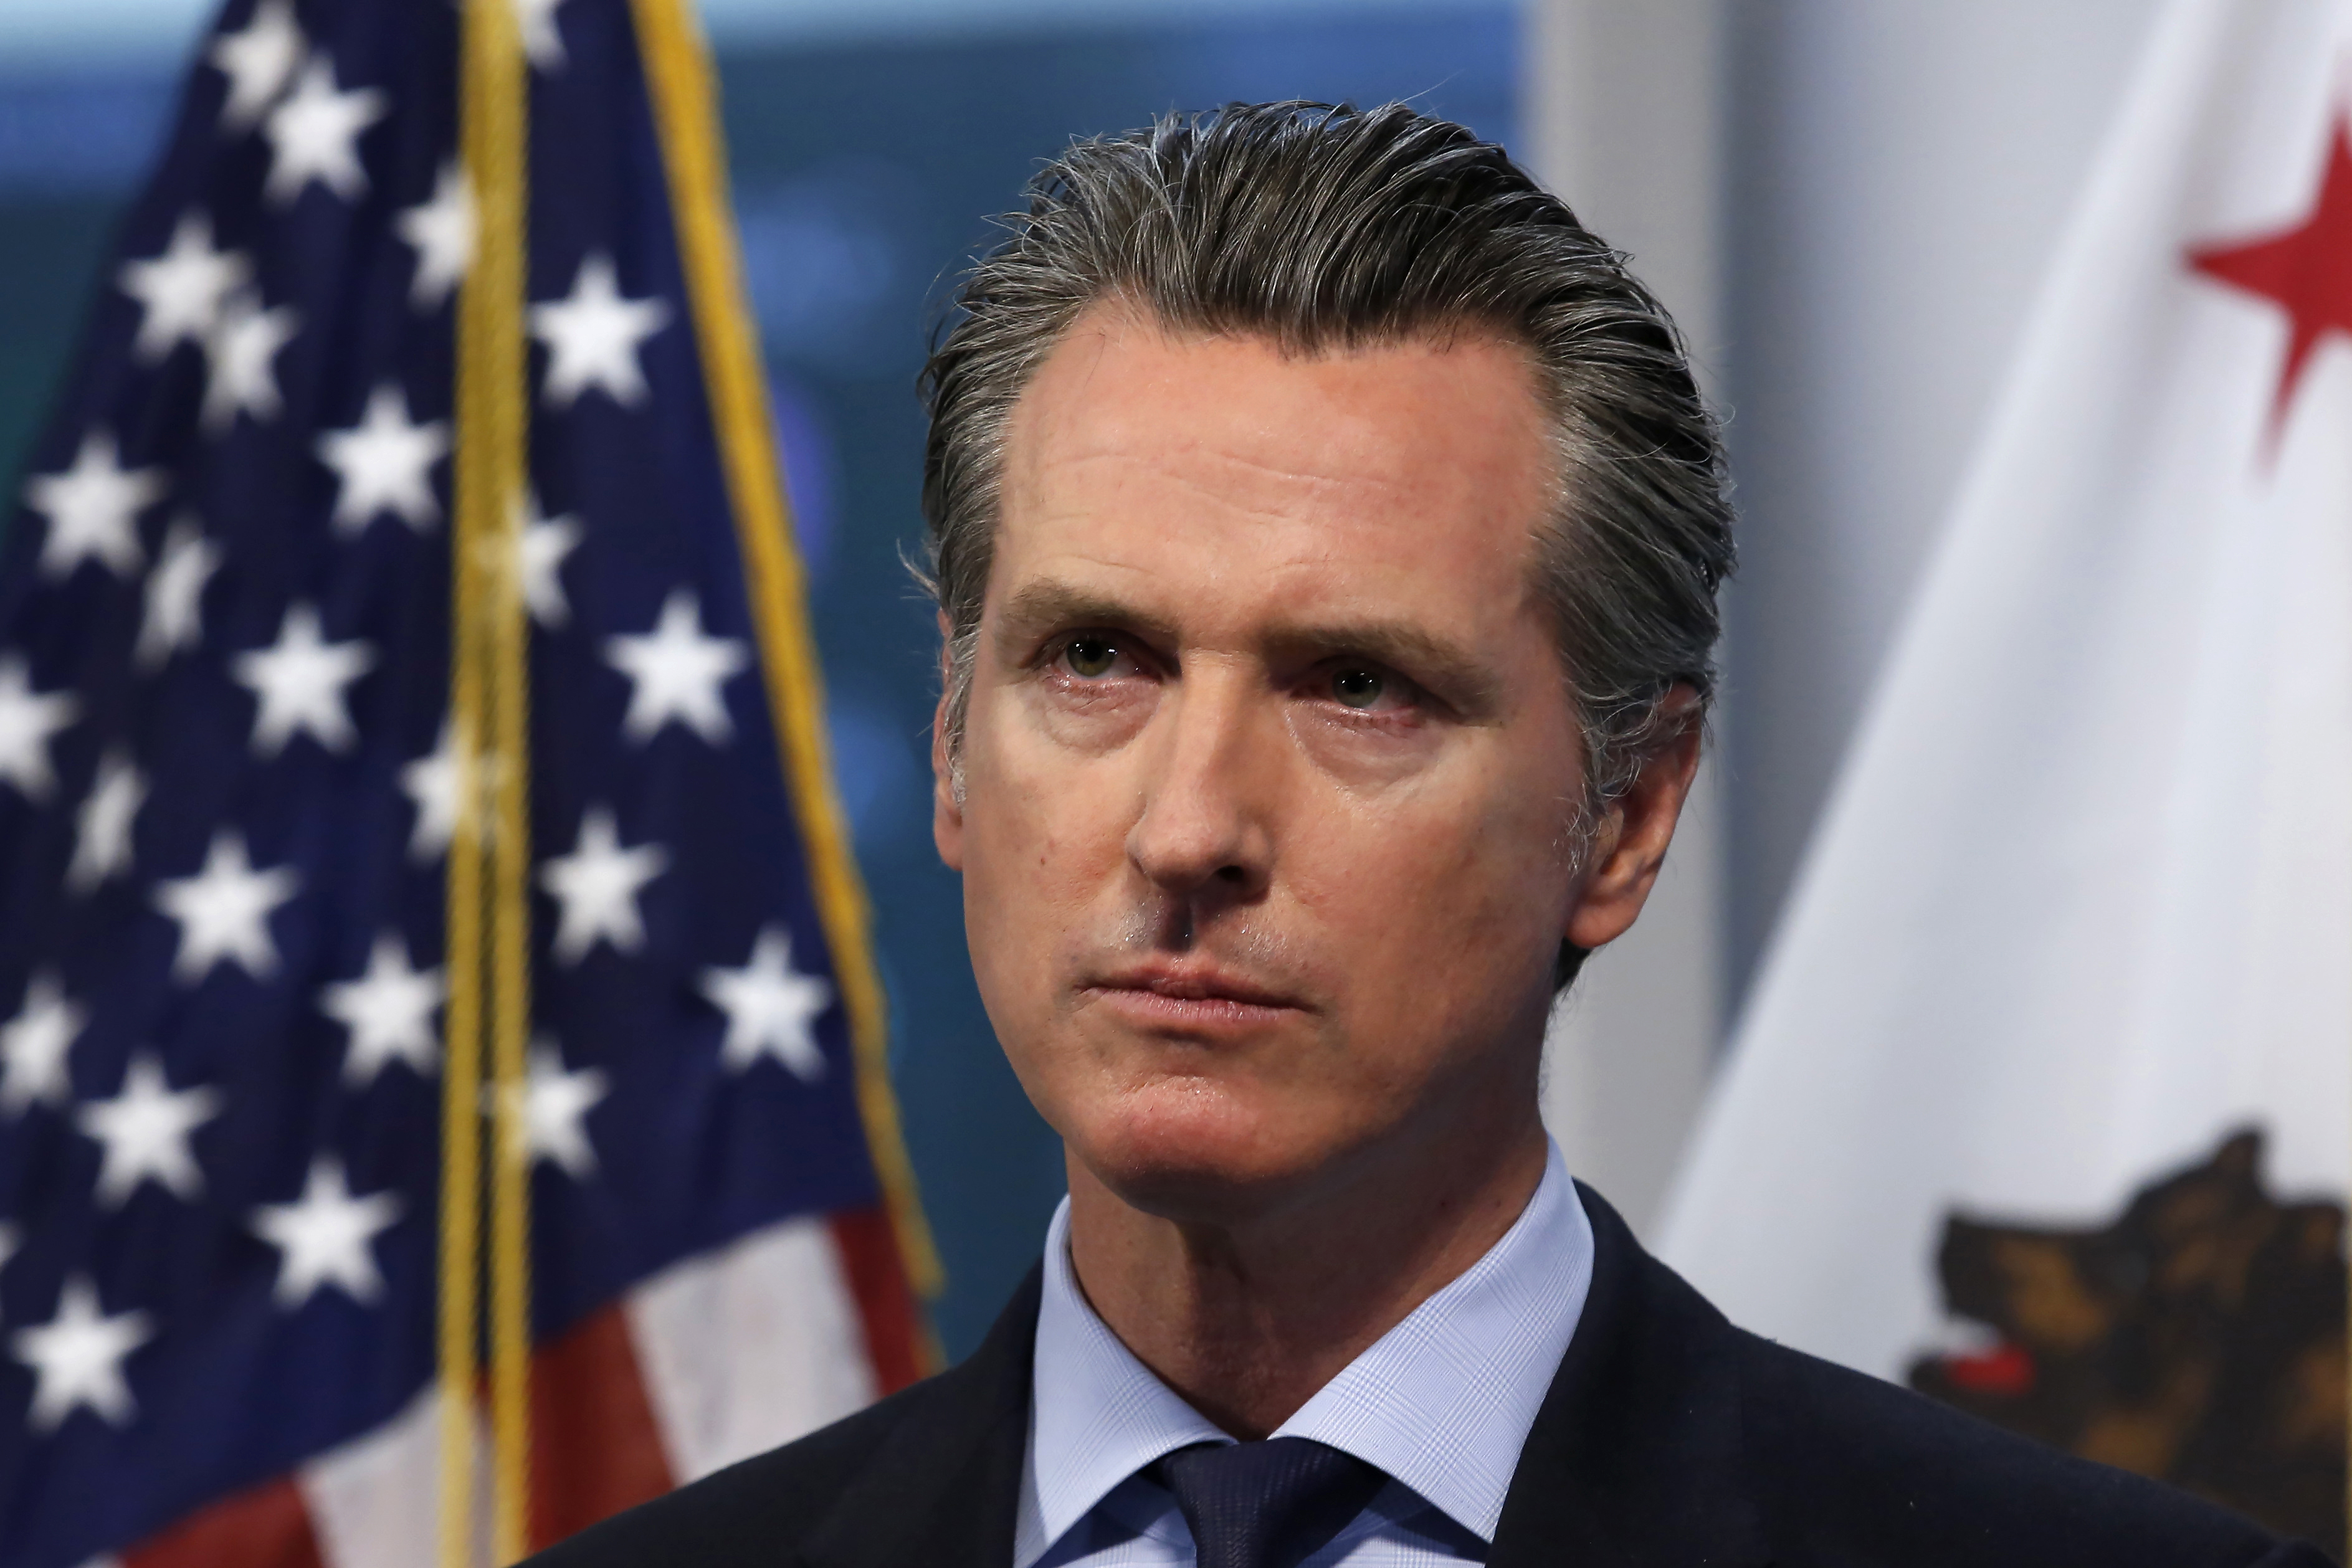 FILE - In this April 9, 2020, file photo, California Gov. Gavin Newsom listens to a reporter's question during his daily news briefing in Rancho Cordova, Calif. At his briefing Friday, May 29, 2020, Newsom gave a powerful statement on the death of George Floyd at the hands of police in Minneapolis. Newsom recounted how the death of Floyd in police custody in Minnesota impacted his four young children. Newsom said his kids broke down and cried as they struggled to understand how 